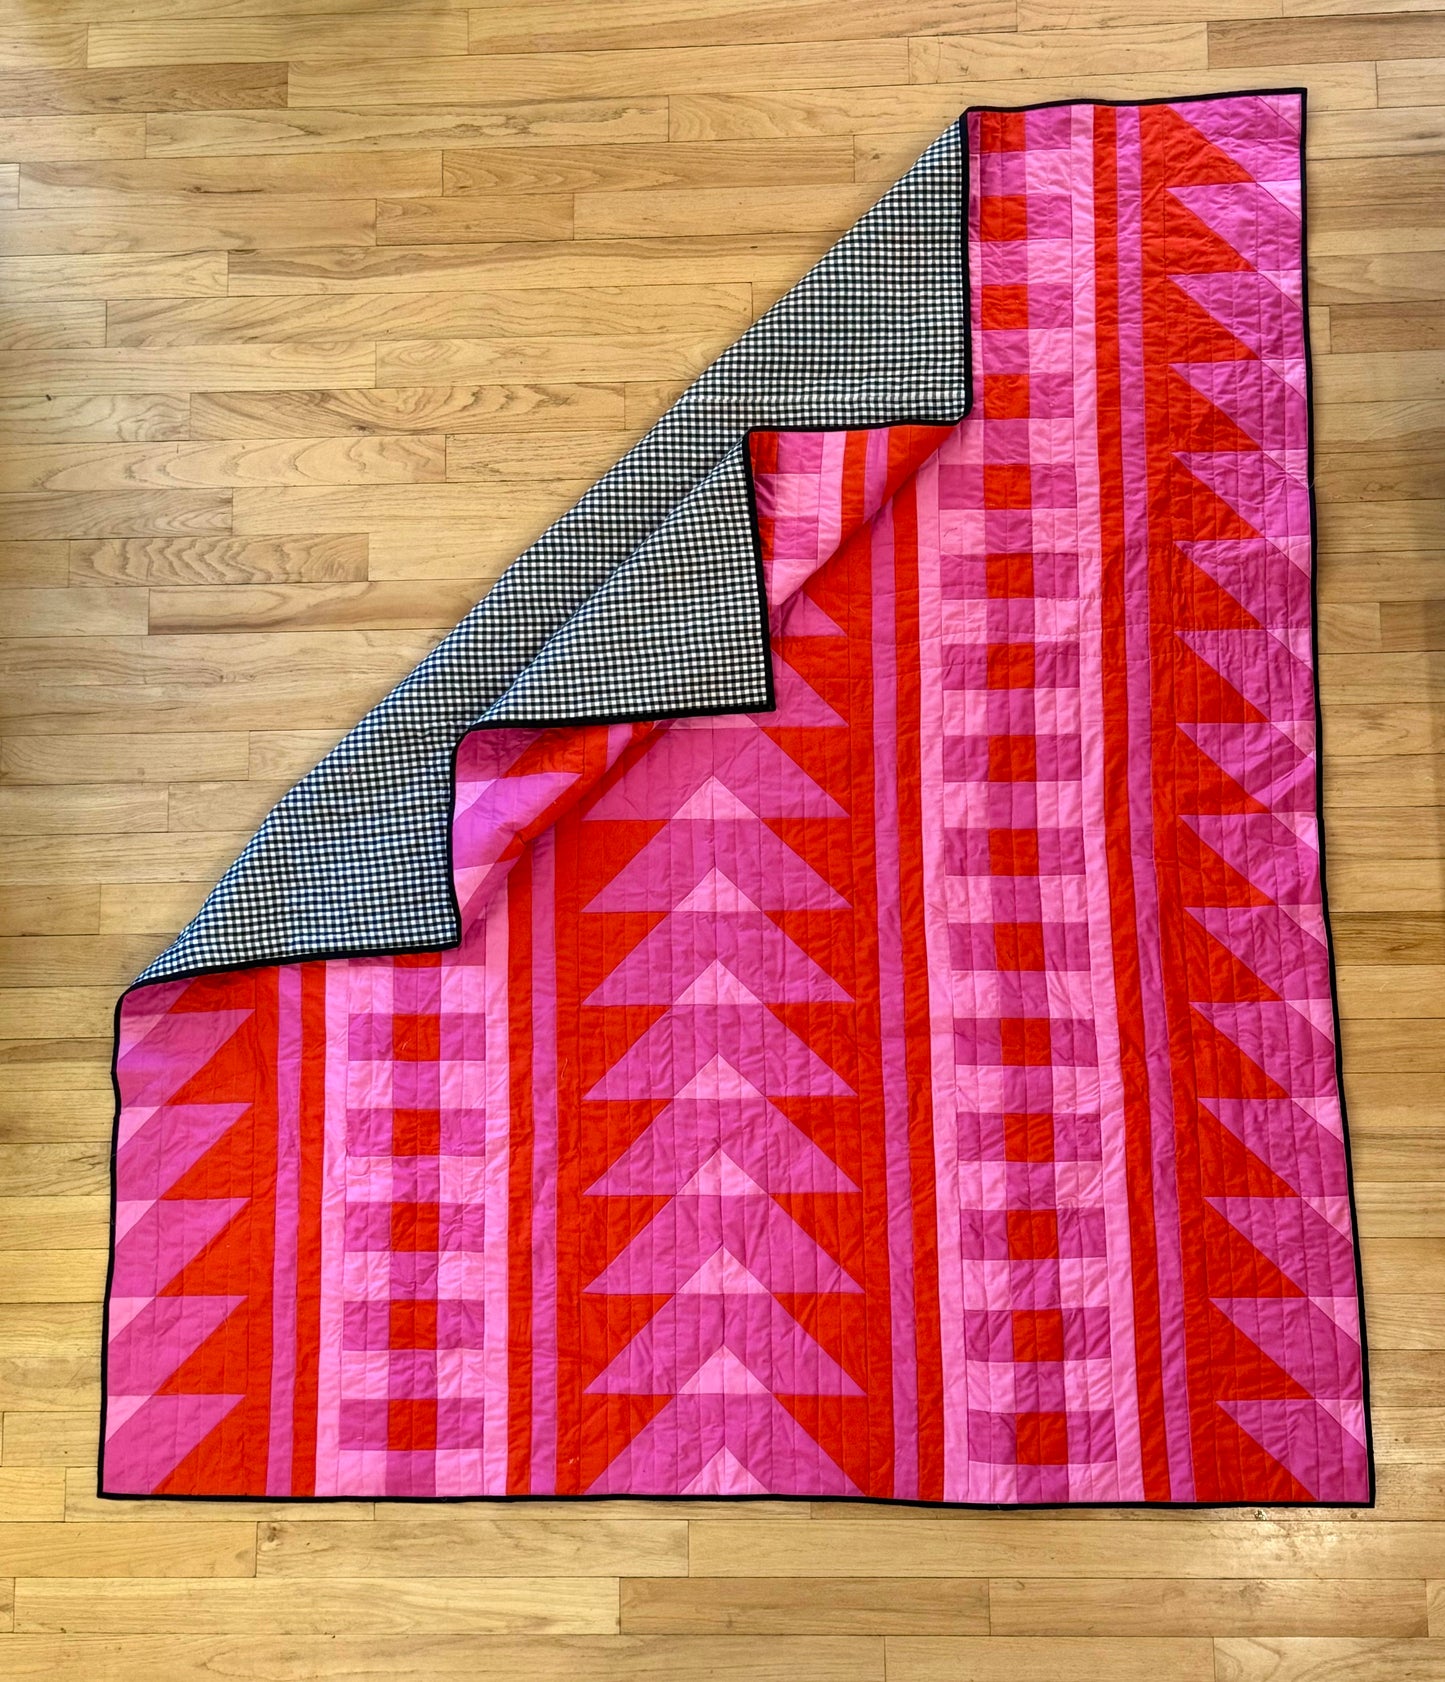 Squats And Running Stitches Co. - Base Camp - Red Mountain Quilt Kit Bundle - Pattern Not Included | Pear Tree Market